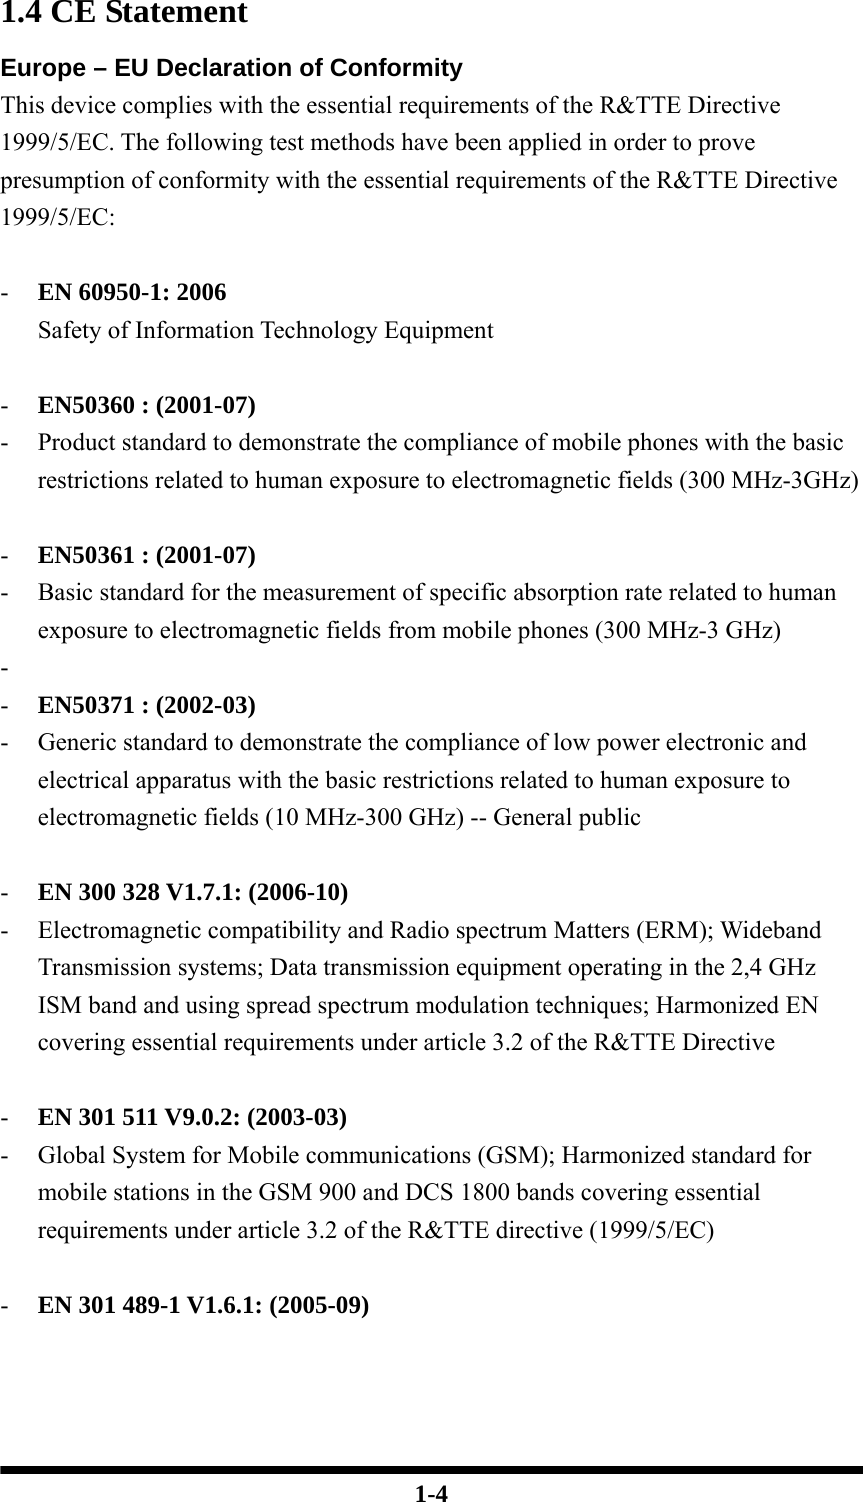  1-4 1.4 CE Statement Europe – EU Declaration of Conformity This device complies with the essential requirements of the R&amp;TTE Directive 1999/5/EC. The following test methods have been applied in order to prove presumption of conformity with the essential requirements of the R&amp;TTE Directive 1999/5/EC:  - EN 60950-1: 2006 Safety of Information Technology Equipment  - EN50360 : (2001-07) - Product standard to demonstrate the compliance of mobile phones with the basic restrictions related to human exposure to electromagnetic fields (300 MHz-3GHz)  - EN50361 : (2001-07) - Basic standard for the measurement of specific absorption rate related to human exposure to electromagnetic fields from mobile phones (300 MHz-3 GHz) -  - EN50371 : (2002-03) - Generic standard to demonstrate the compliance of low power electronic and electrical apparatus with the basic restrictions related to human exposure to electromagnetic fields (10 MHz-300 GHz) -- General public  - EN 300 328 V1.7.1: (2006-10) - Electromagnetic compatibility and Radio spectrum Matters (ERM); Wideband Transmission systems; Data transmission equipment operating in the 2,4 GHz ISM band and using spread spectrum modulation techniques; Harmonized EN covering essential requirements under article 3.2 of the R&amp;TTE Directive  - EN 301 511 V9.0.2: (2003-03) - Global System for Mobile communications (GSM); Harmonized standard for mobile stations in the GSM 900 and DCS 1800 bands covering essential requirements under article 3.2 of the R&amp;TTE directive (1999/5/EC)  - EN 301 489-1 V1.6.1: (2005-09) 